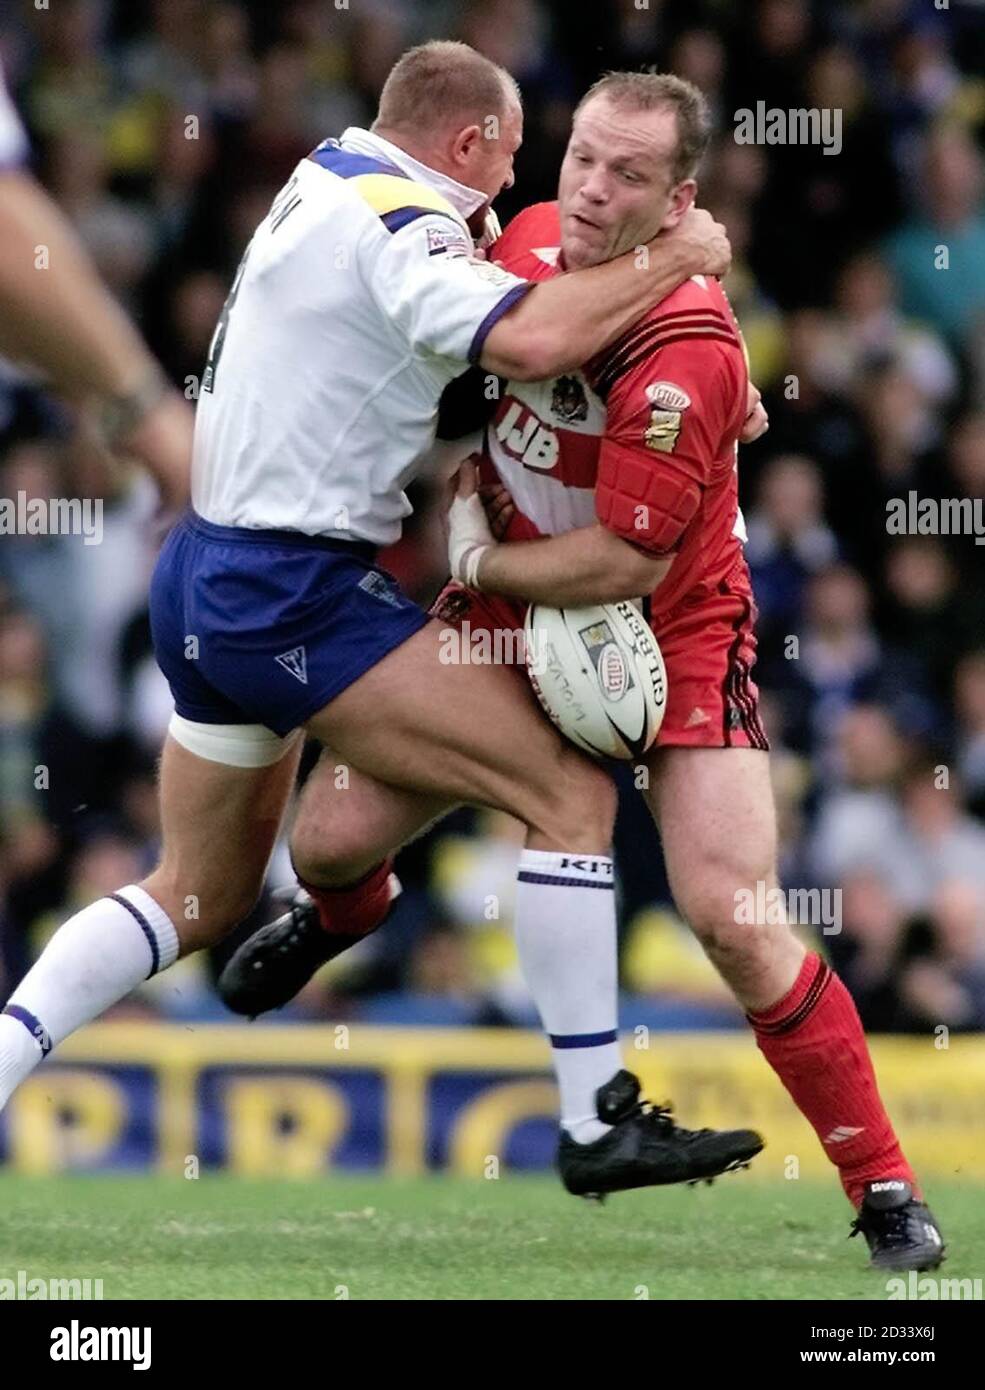 Wigan's Terry O'Connor (R) loses the ball under pressure from Warrington's Mark Hilton during their Tetley Bitter Super League game at Wilderspool, Warrington. Stock Photo